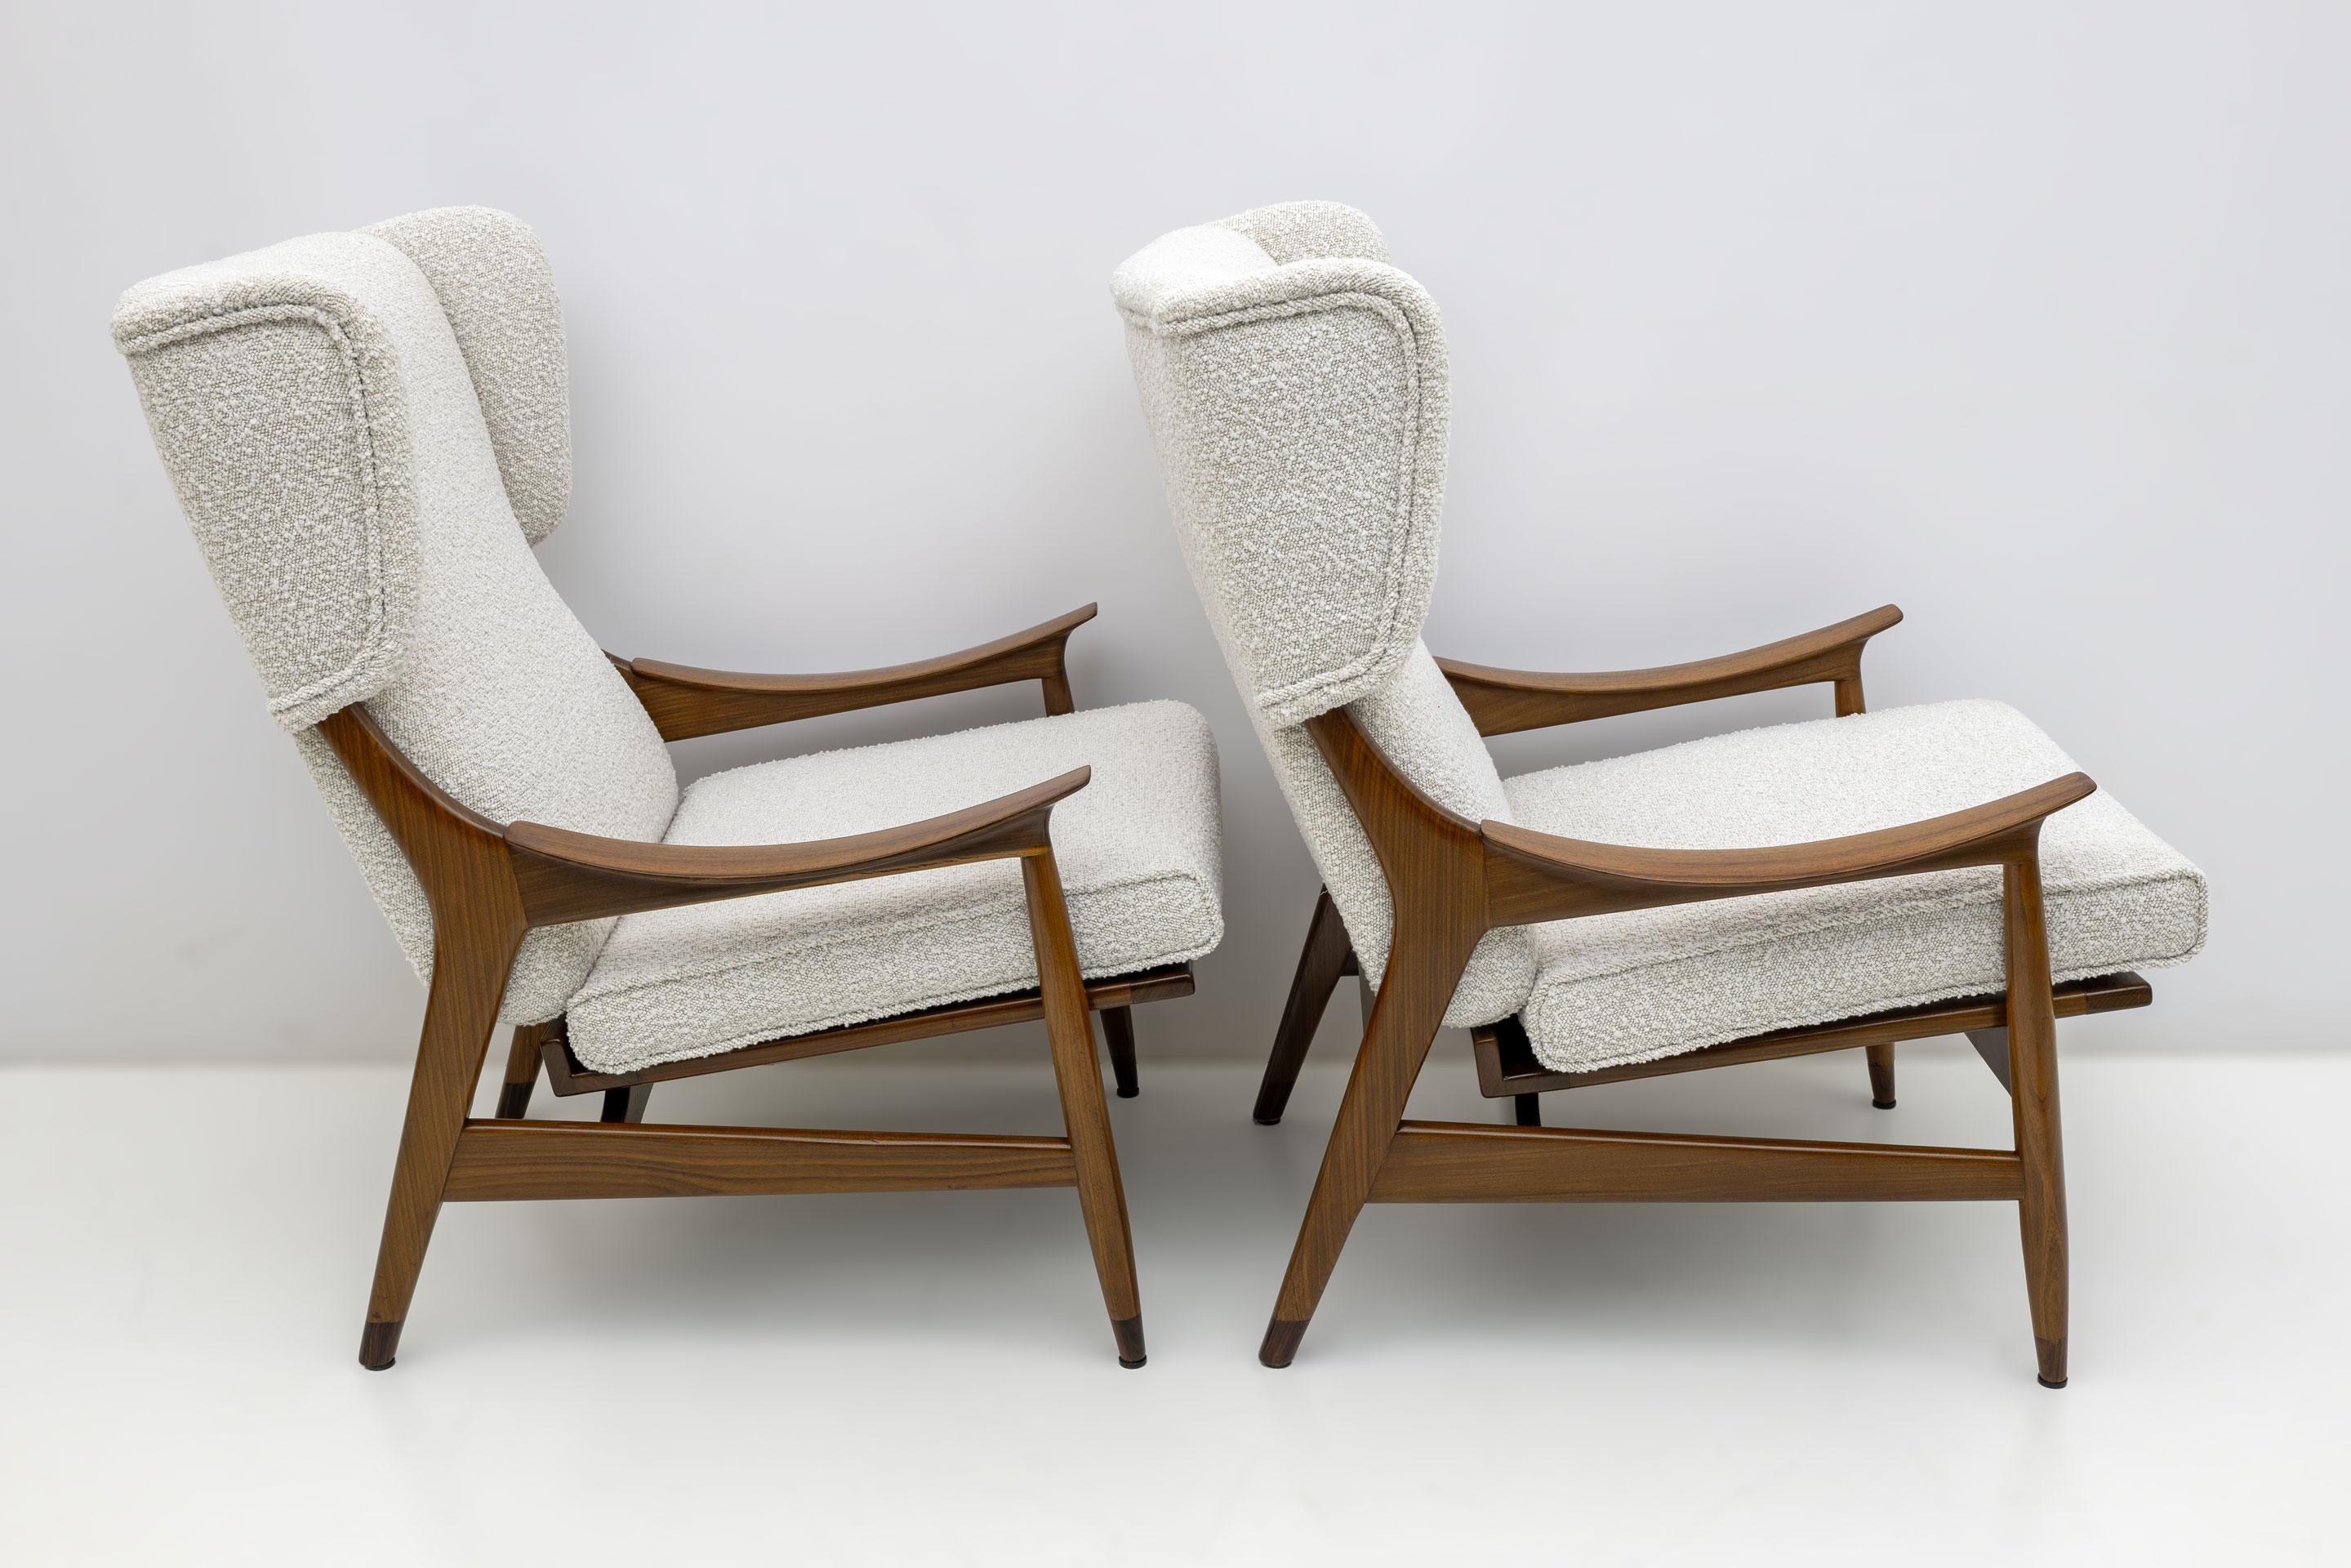 Pair of Mid-Century Modern Teak and Bouclè Armchairs Model FM 106 by Framar, 50s For Sale 1